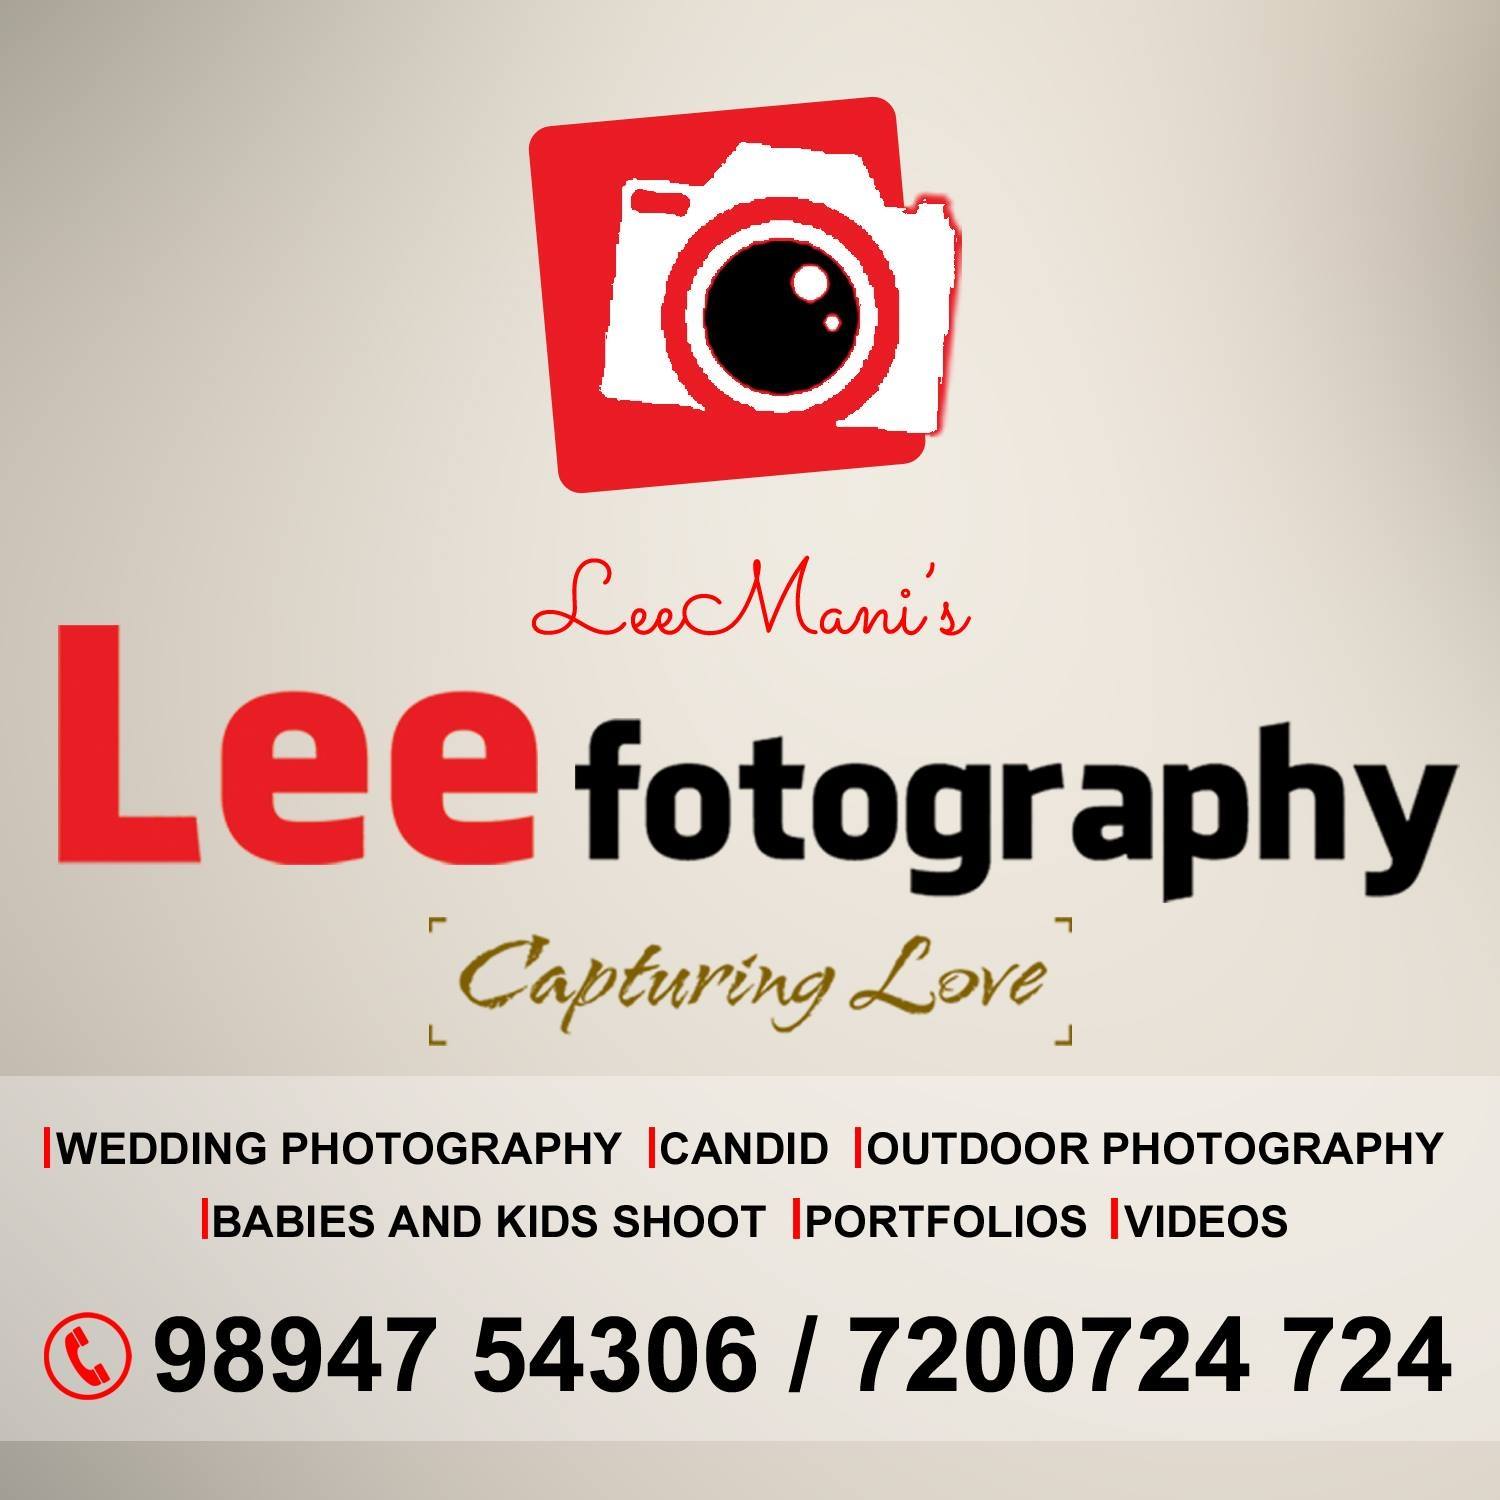 LeeFotography|Catering Services|Event Services